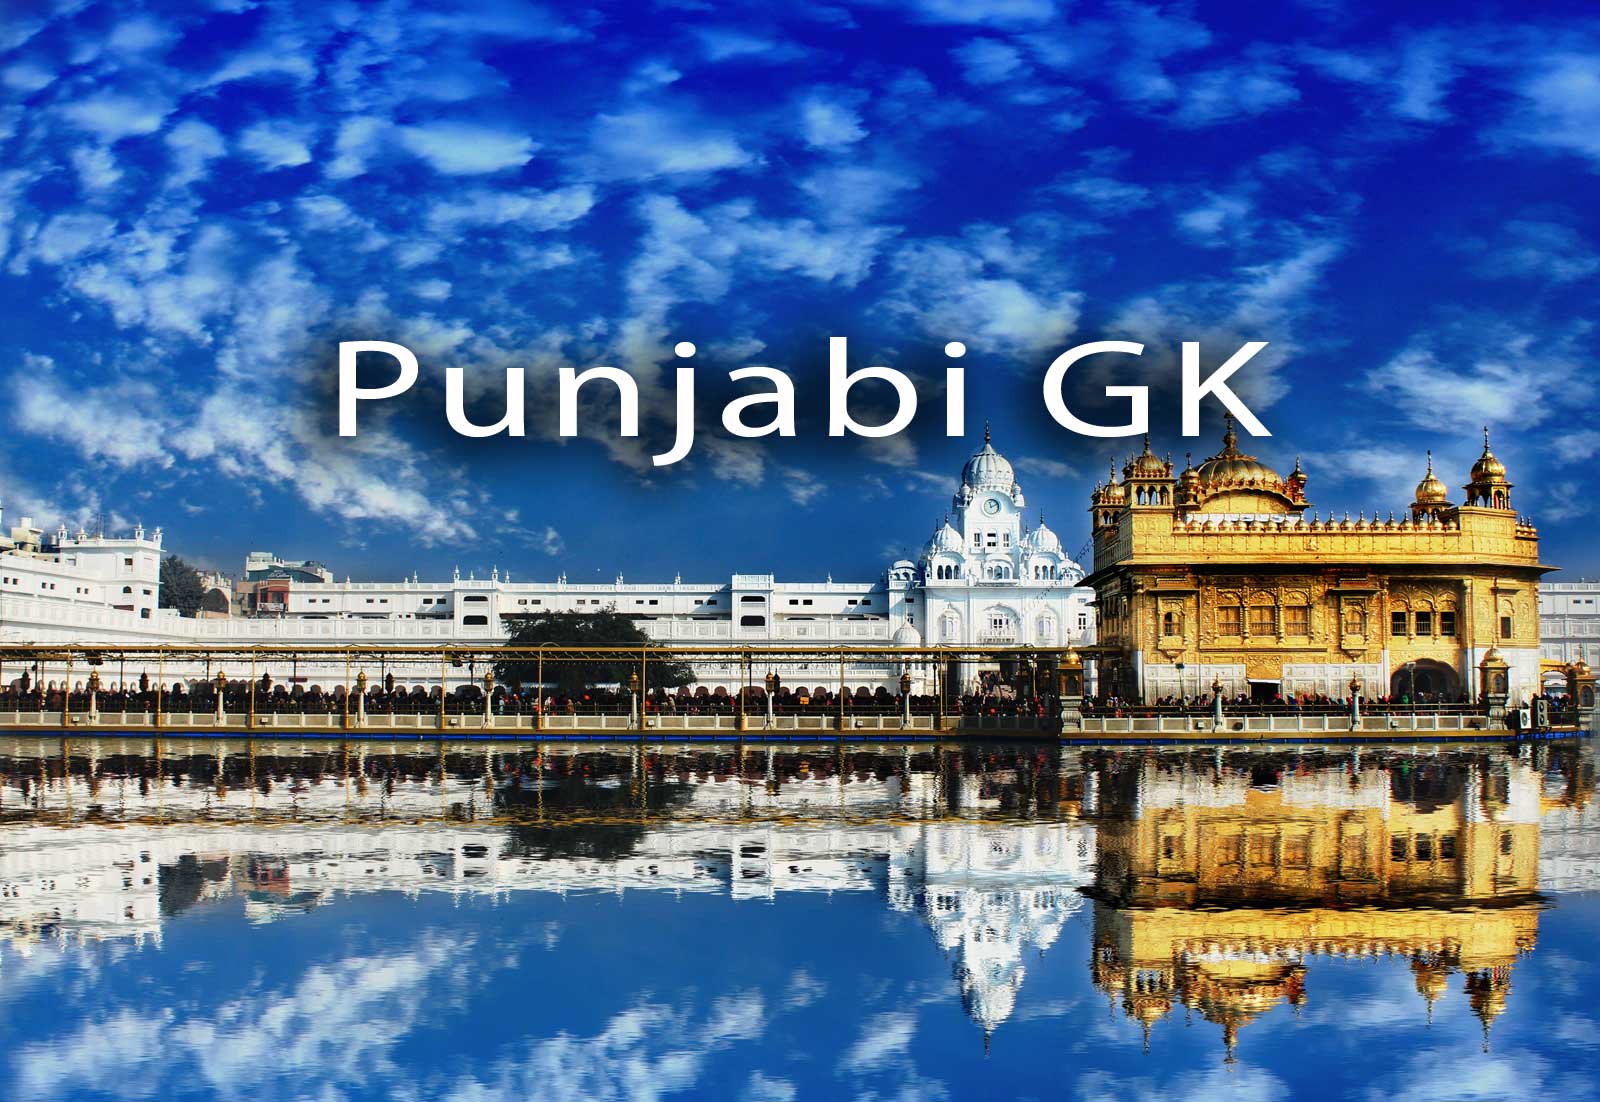 Punjabi GK Previous Year Questions and Answers